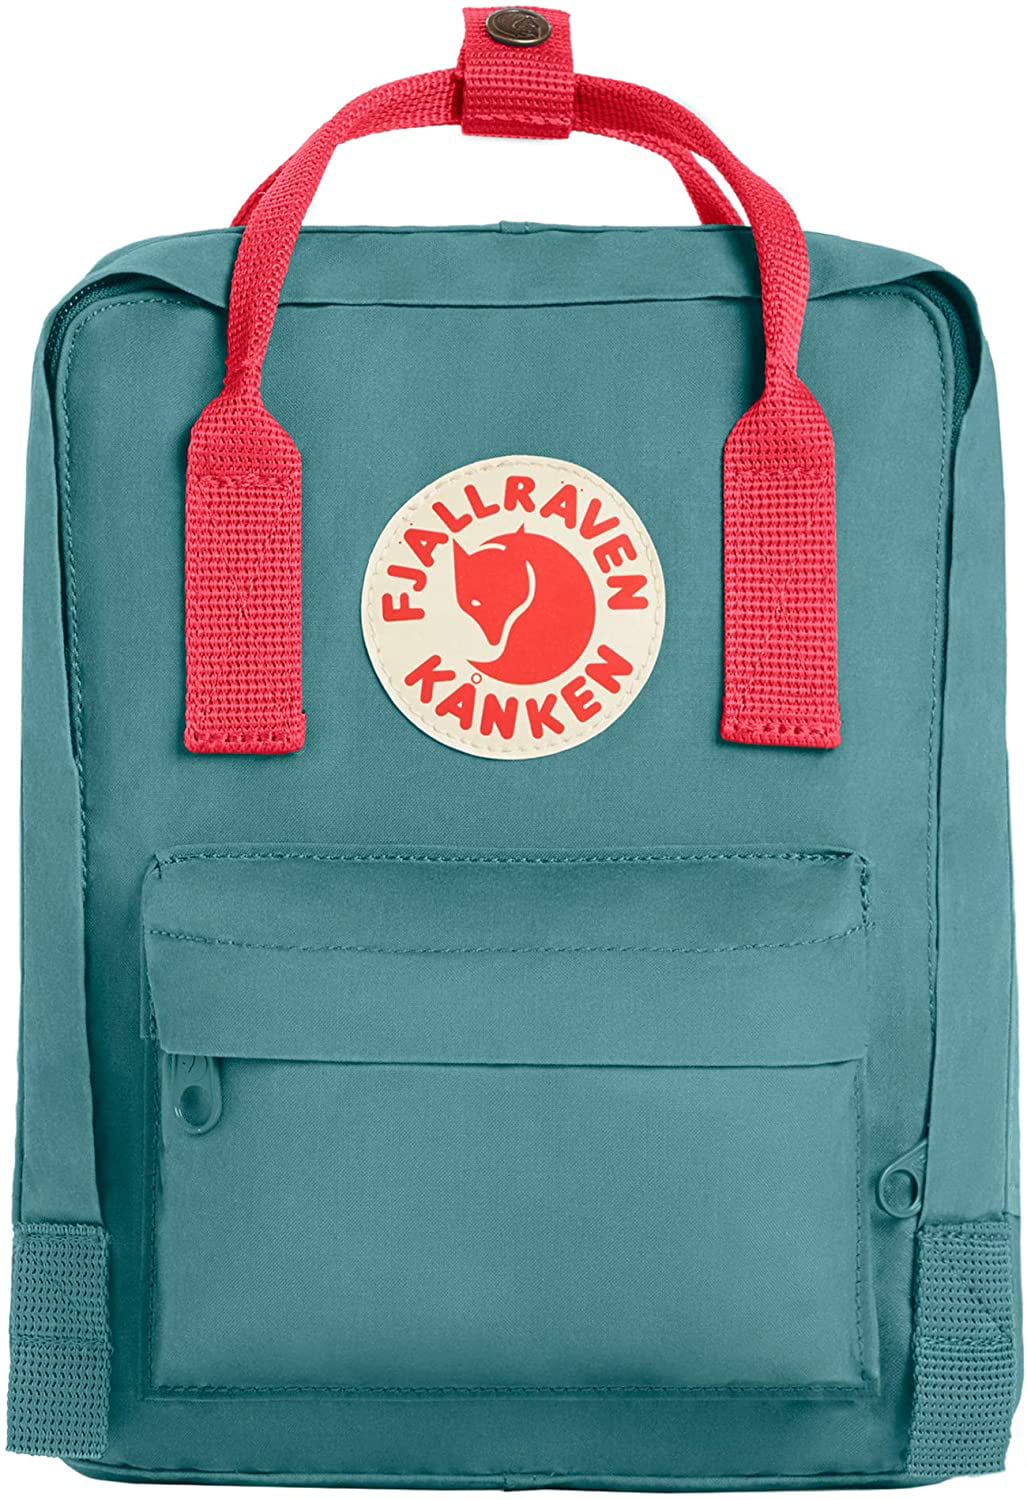 Fjallraven, Kanken Classic Backpack for Everyday,Three Size